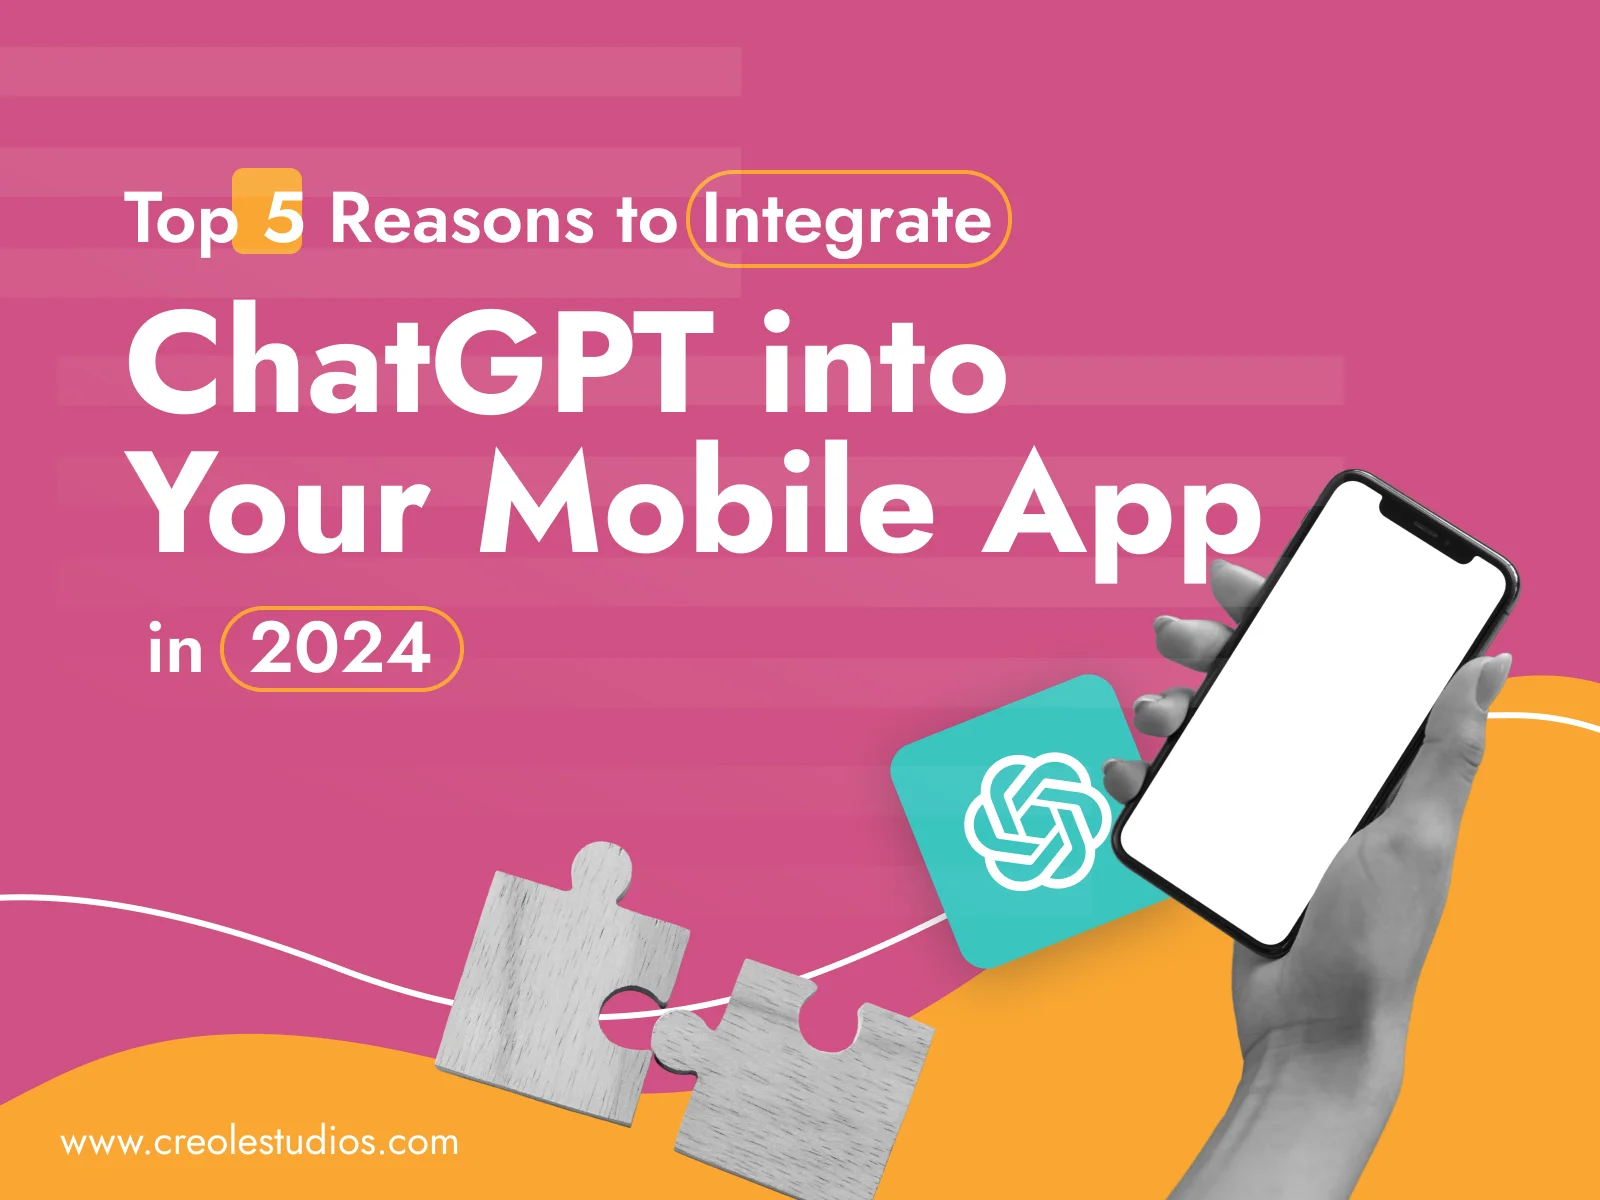 Top-5-Reasons-to-Integrate-ChatGPT-into-Your-Mobile-App-in-2024